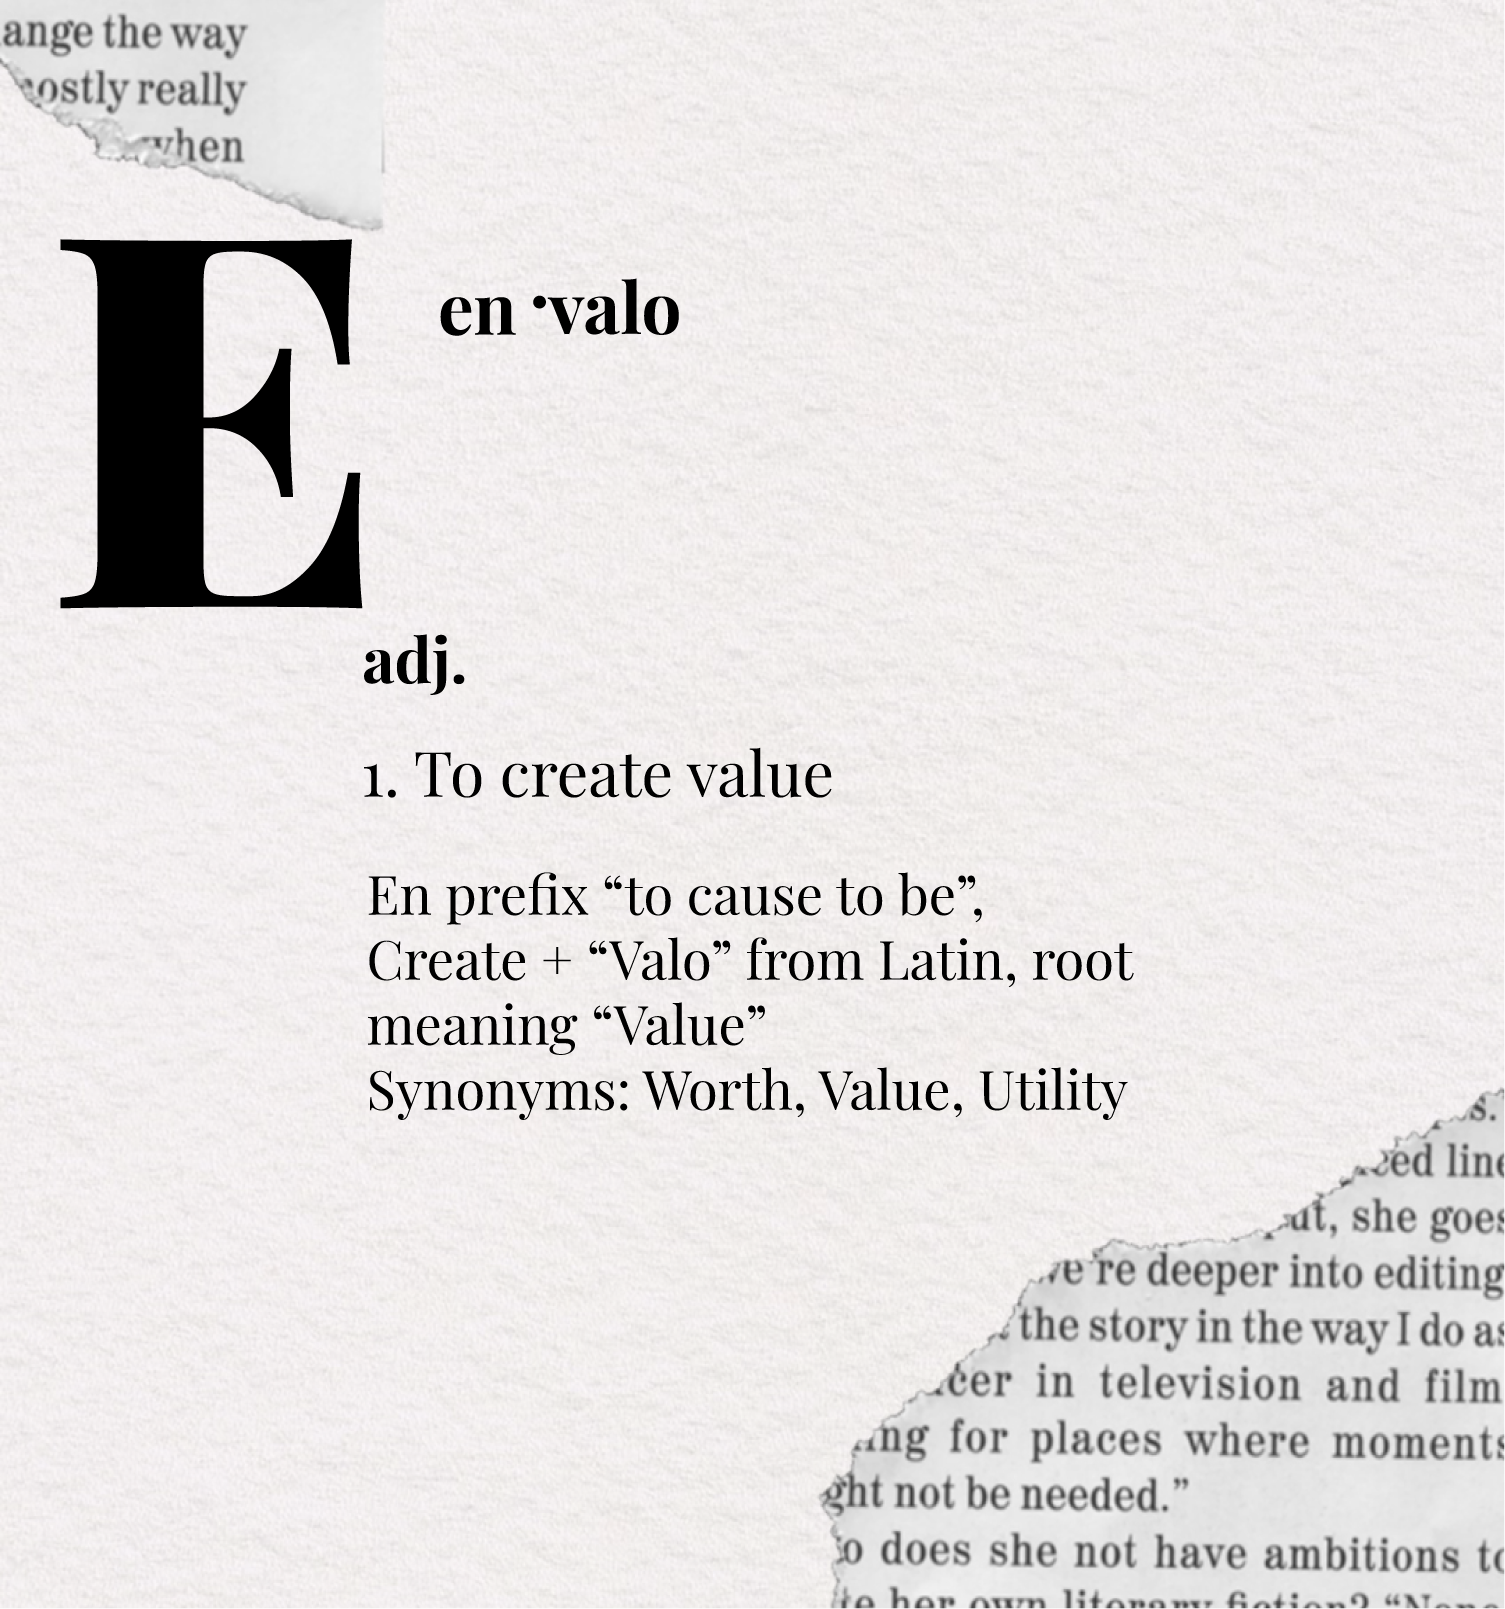 Image of a dictionary definition for the meaning of Envalo